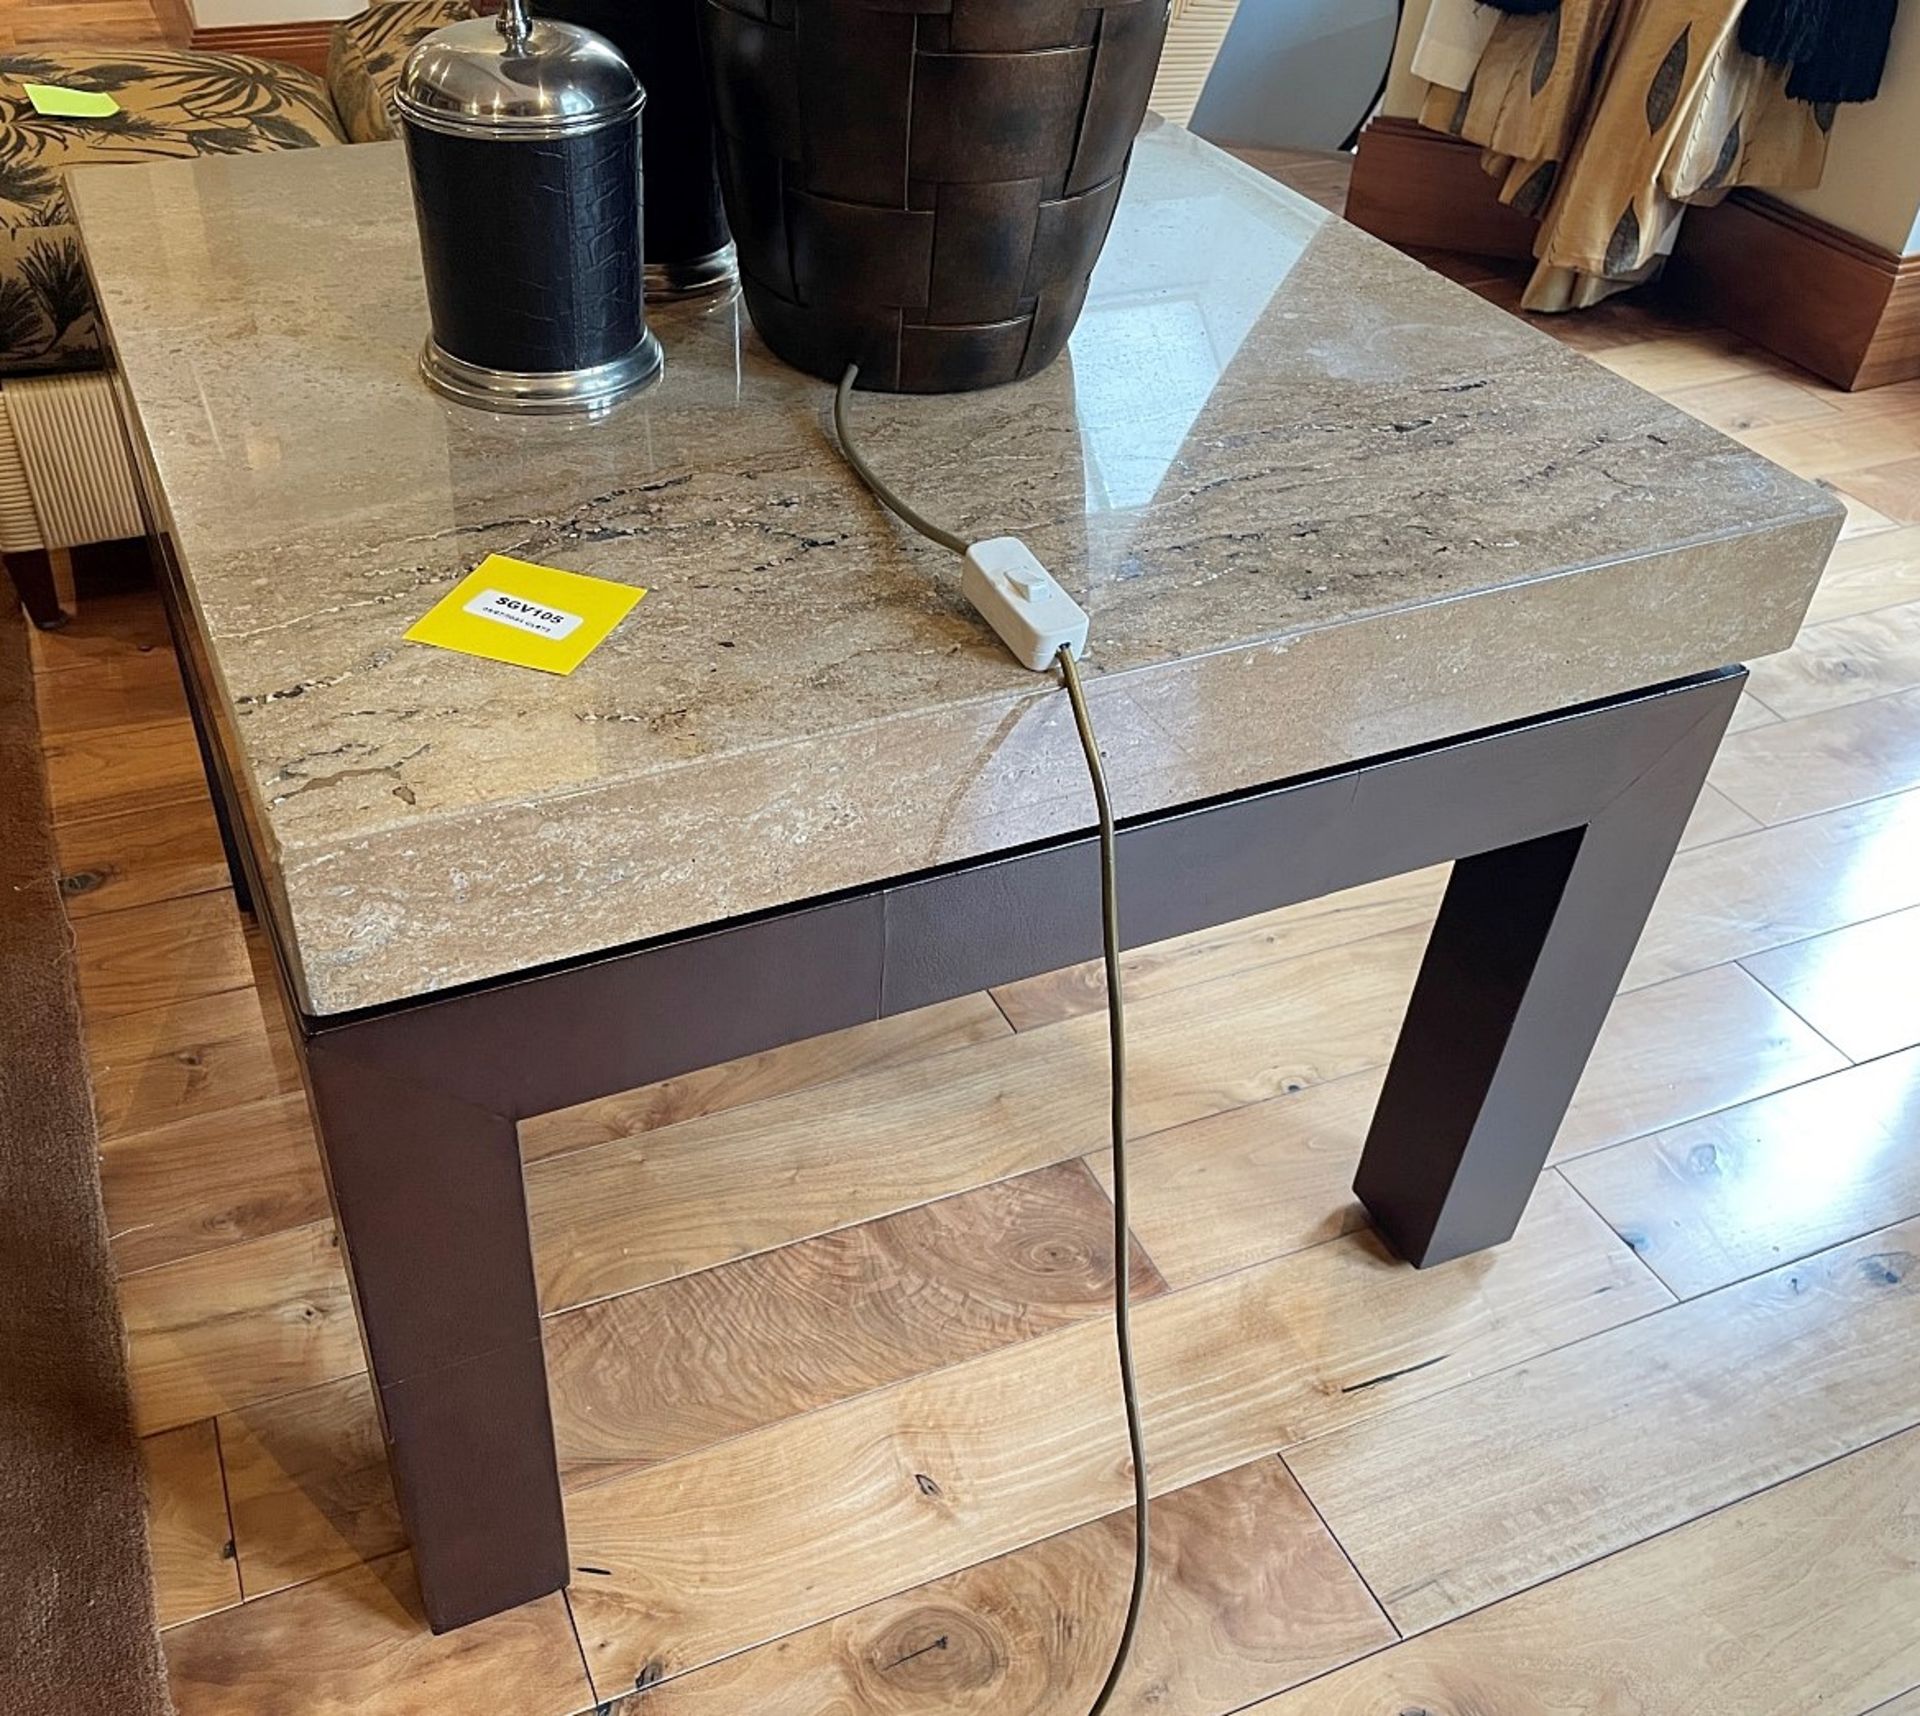 1 x Marble Topped Occasional Table  - Dimensions: 76 x 76 x H57cm / Top Thickness is 8cm